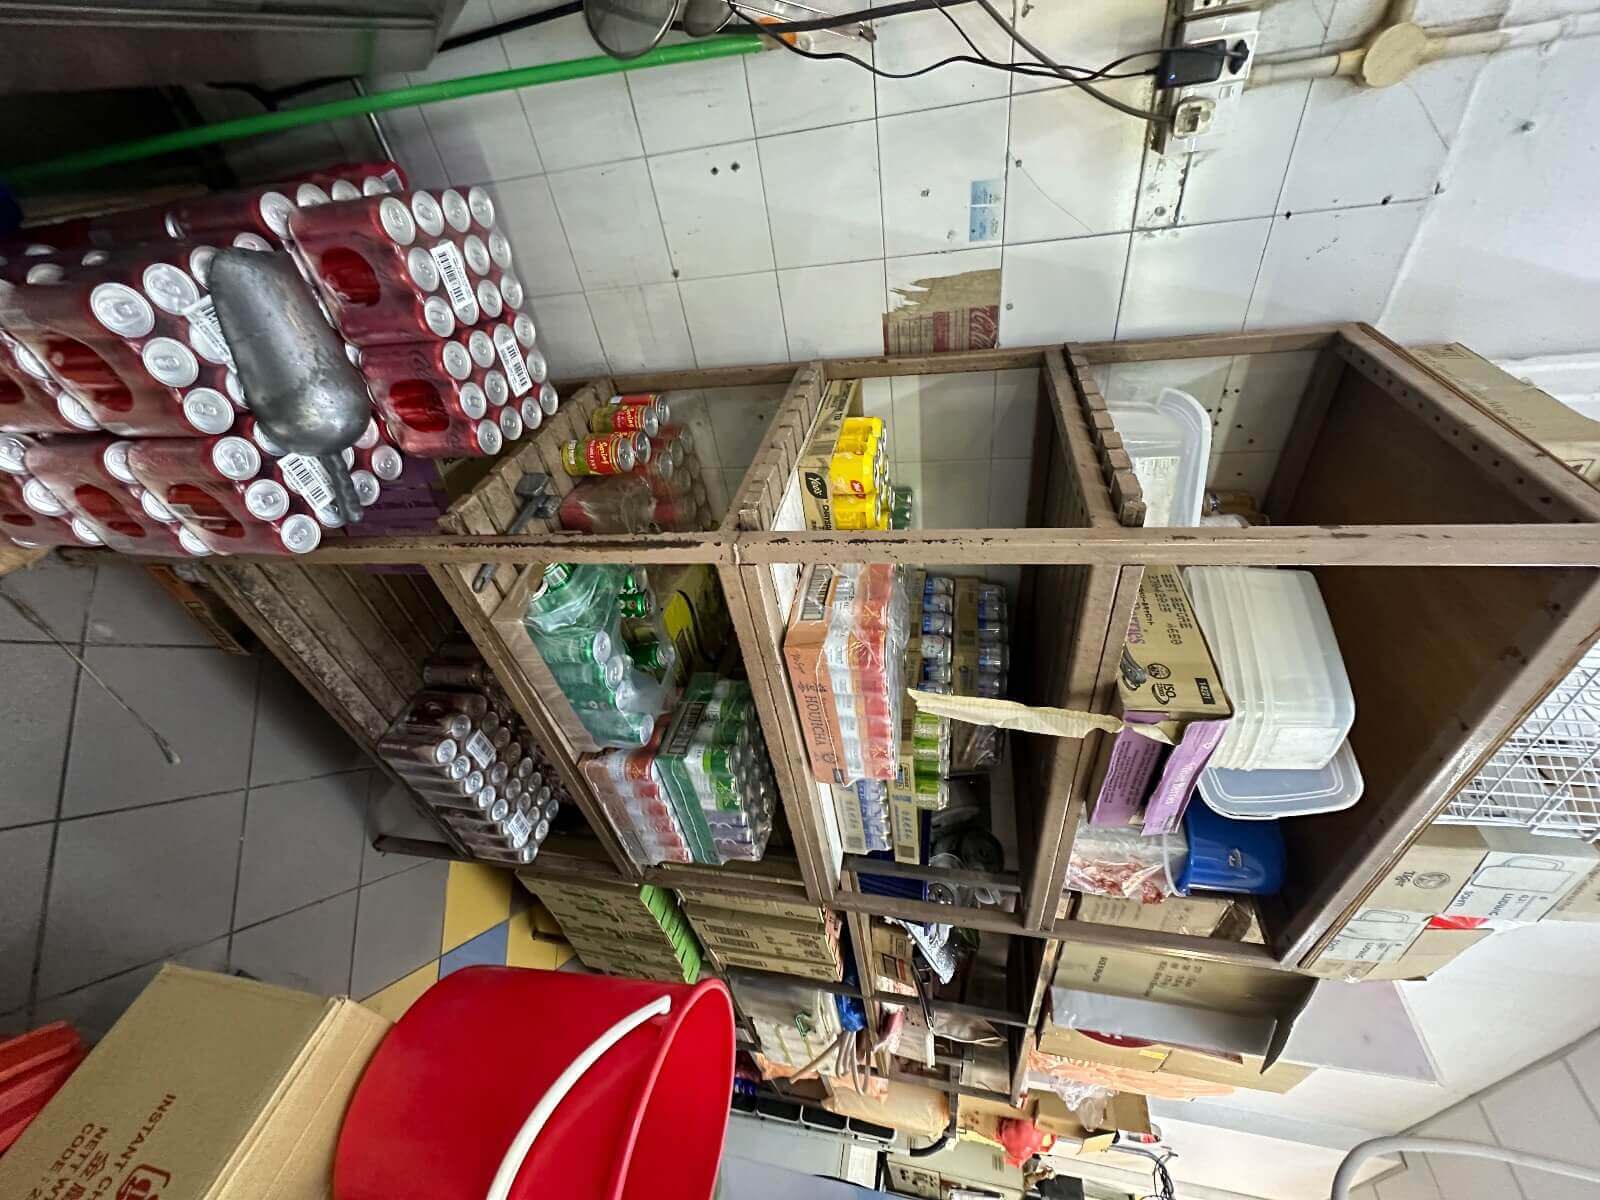 1x drink stall with equipment n stock ready and 1x stall to sell anything